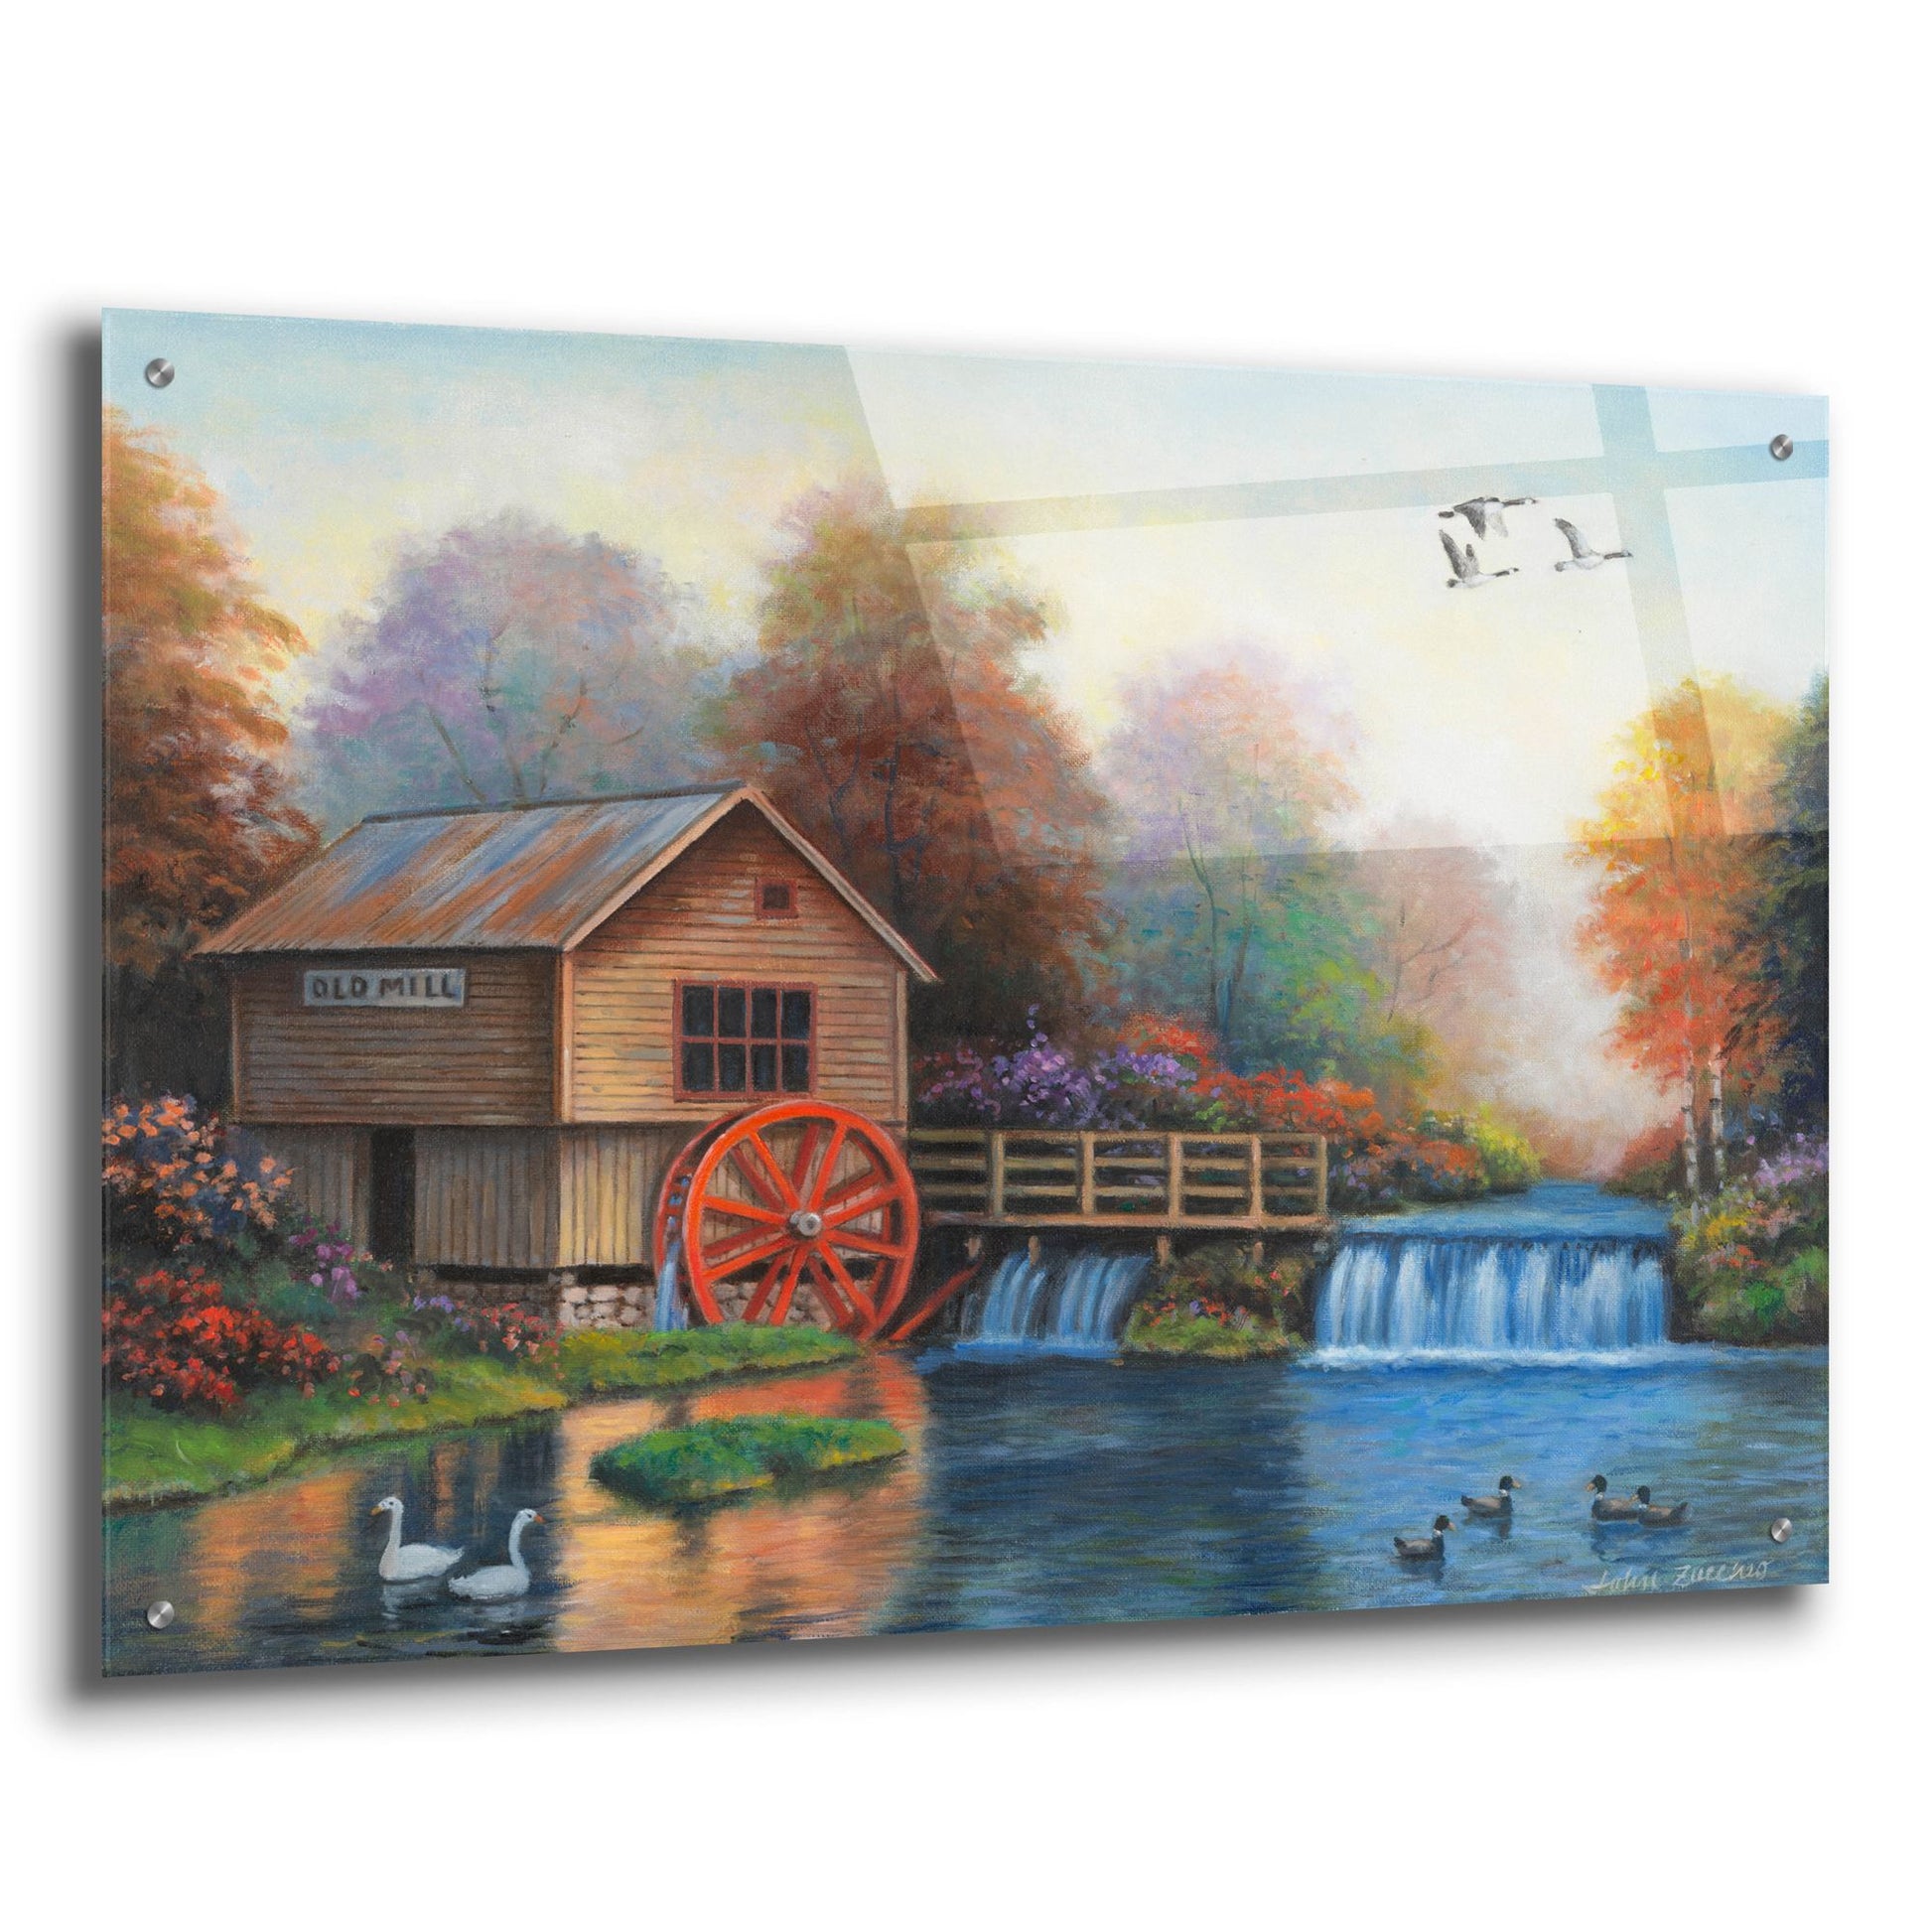 Epic Art 'Autumn at the Old Mill' by John Zaccheo, Acrylic Glass Wall Art,36x24